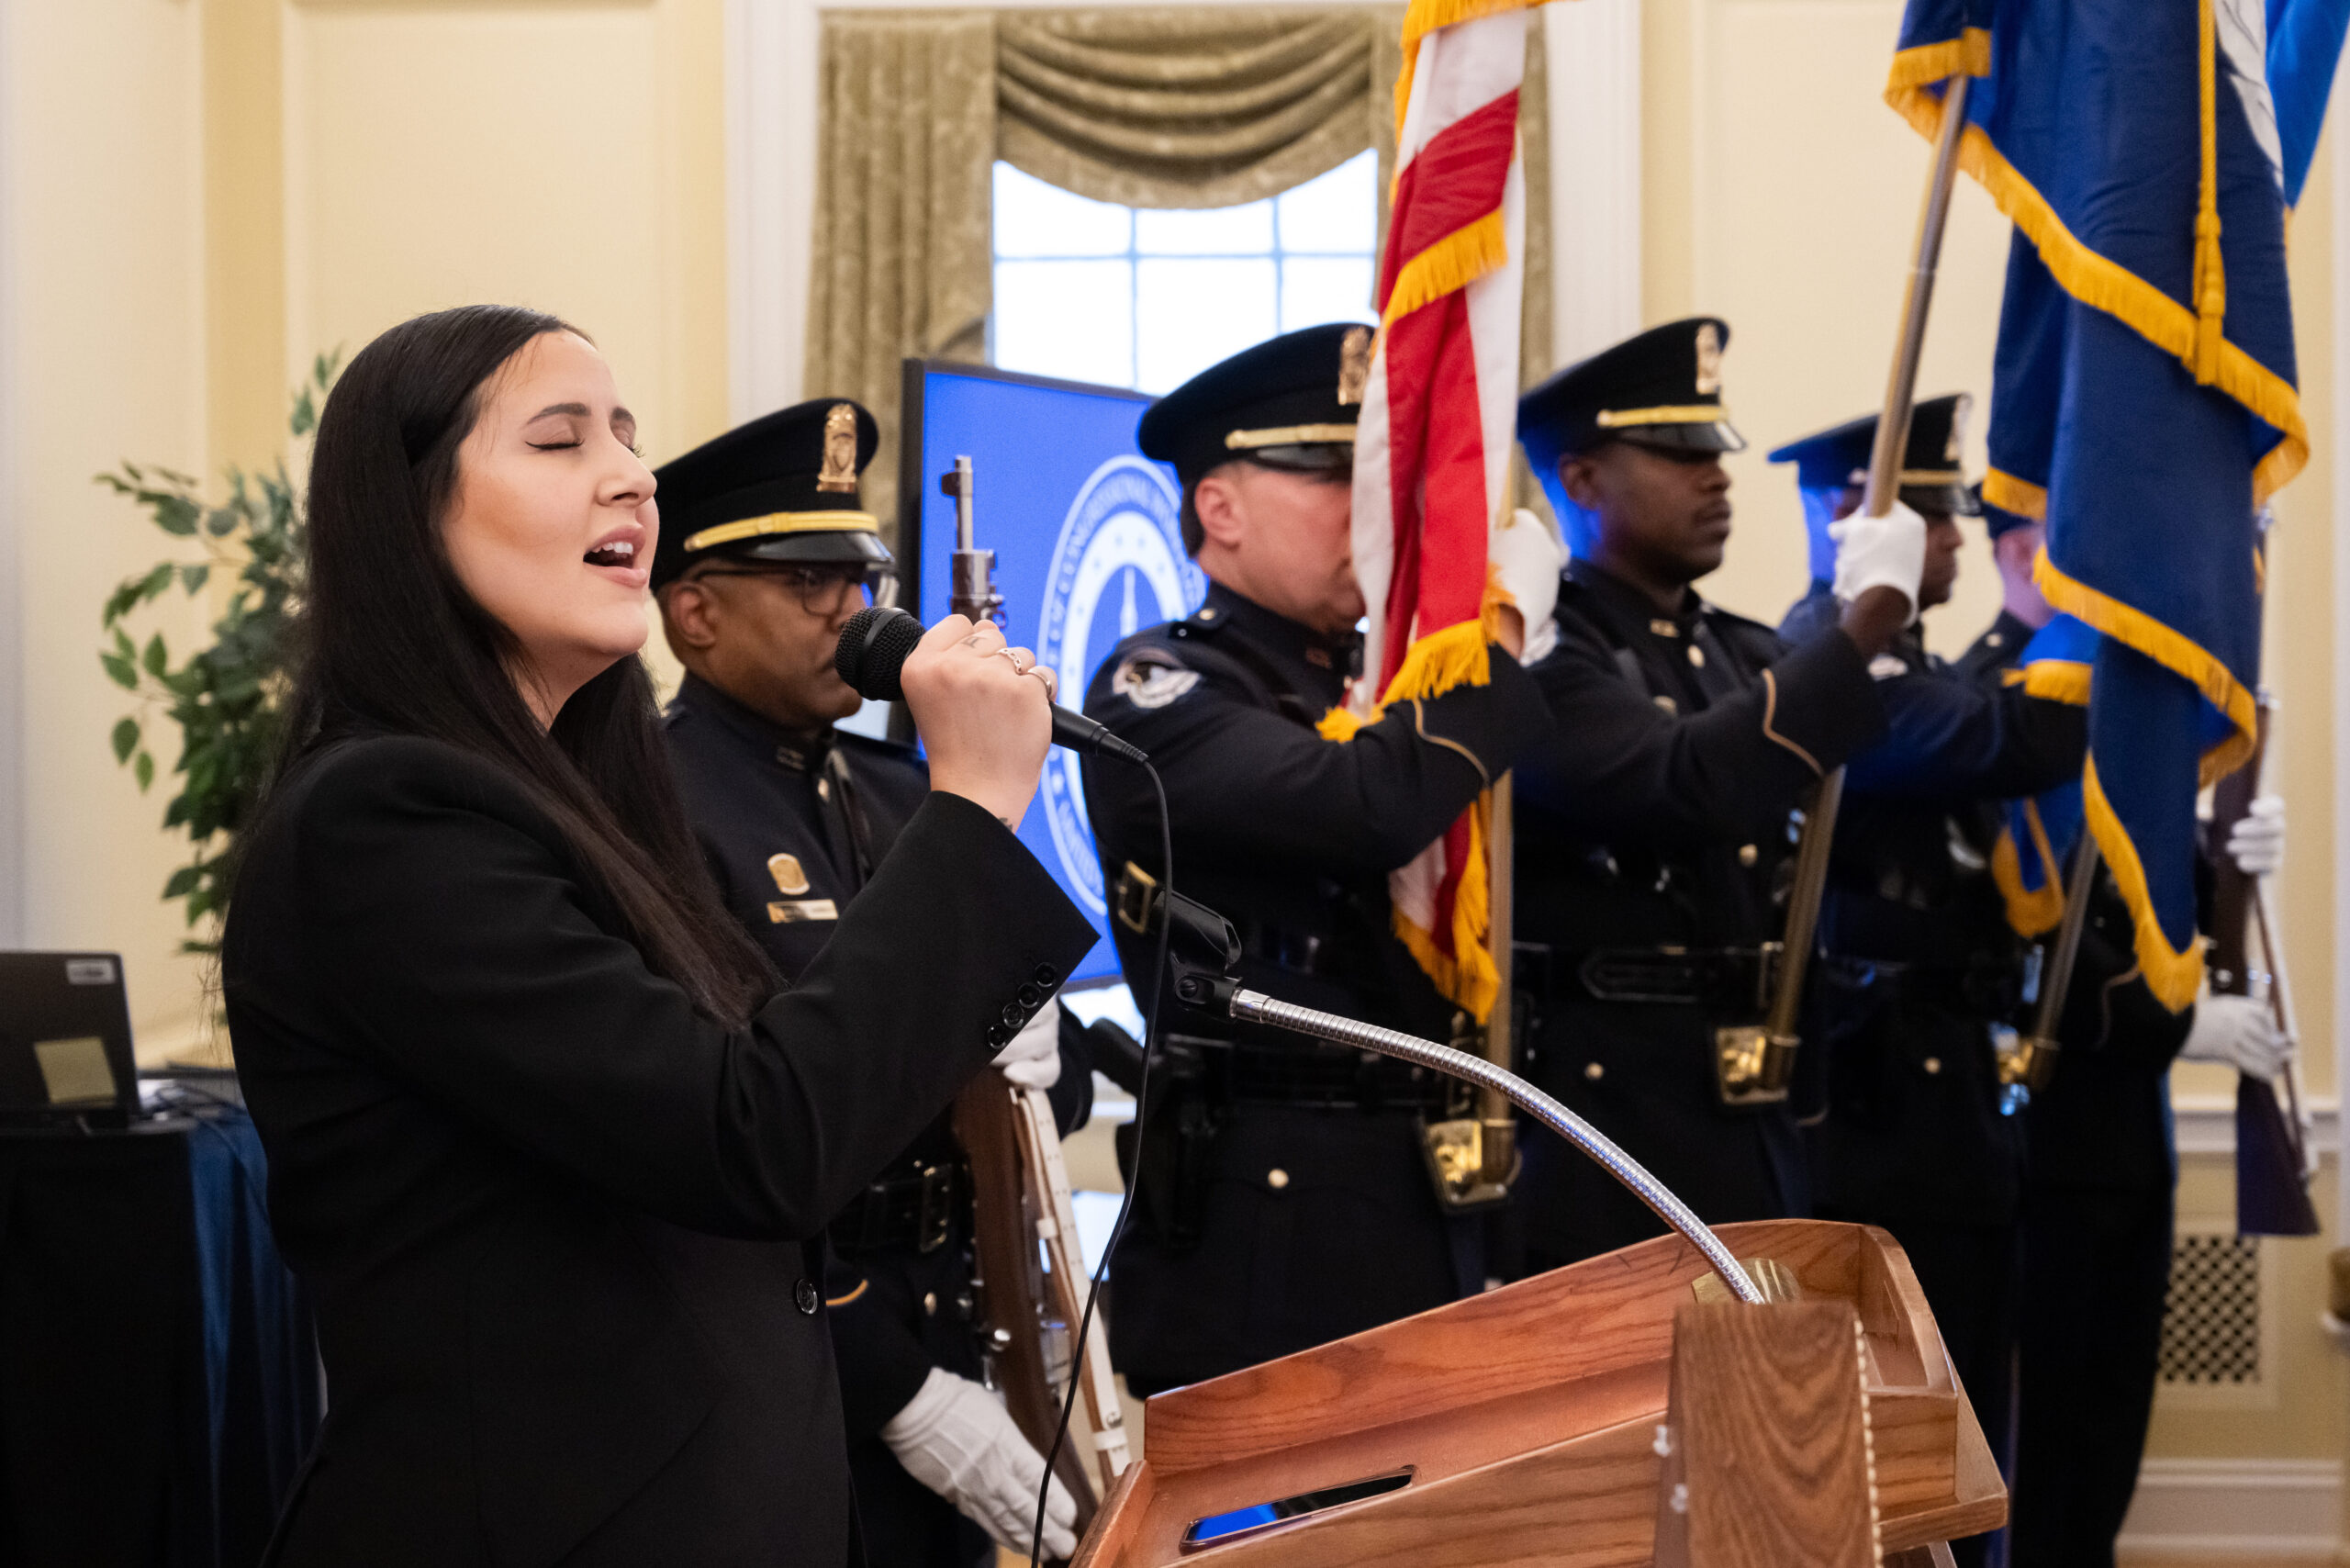 A woman sings into a microphone at a podium on the left with a police color guard standing behind her to the right